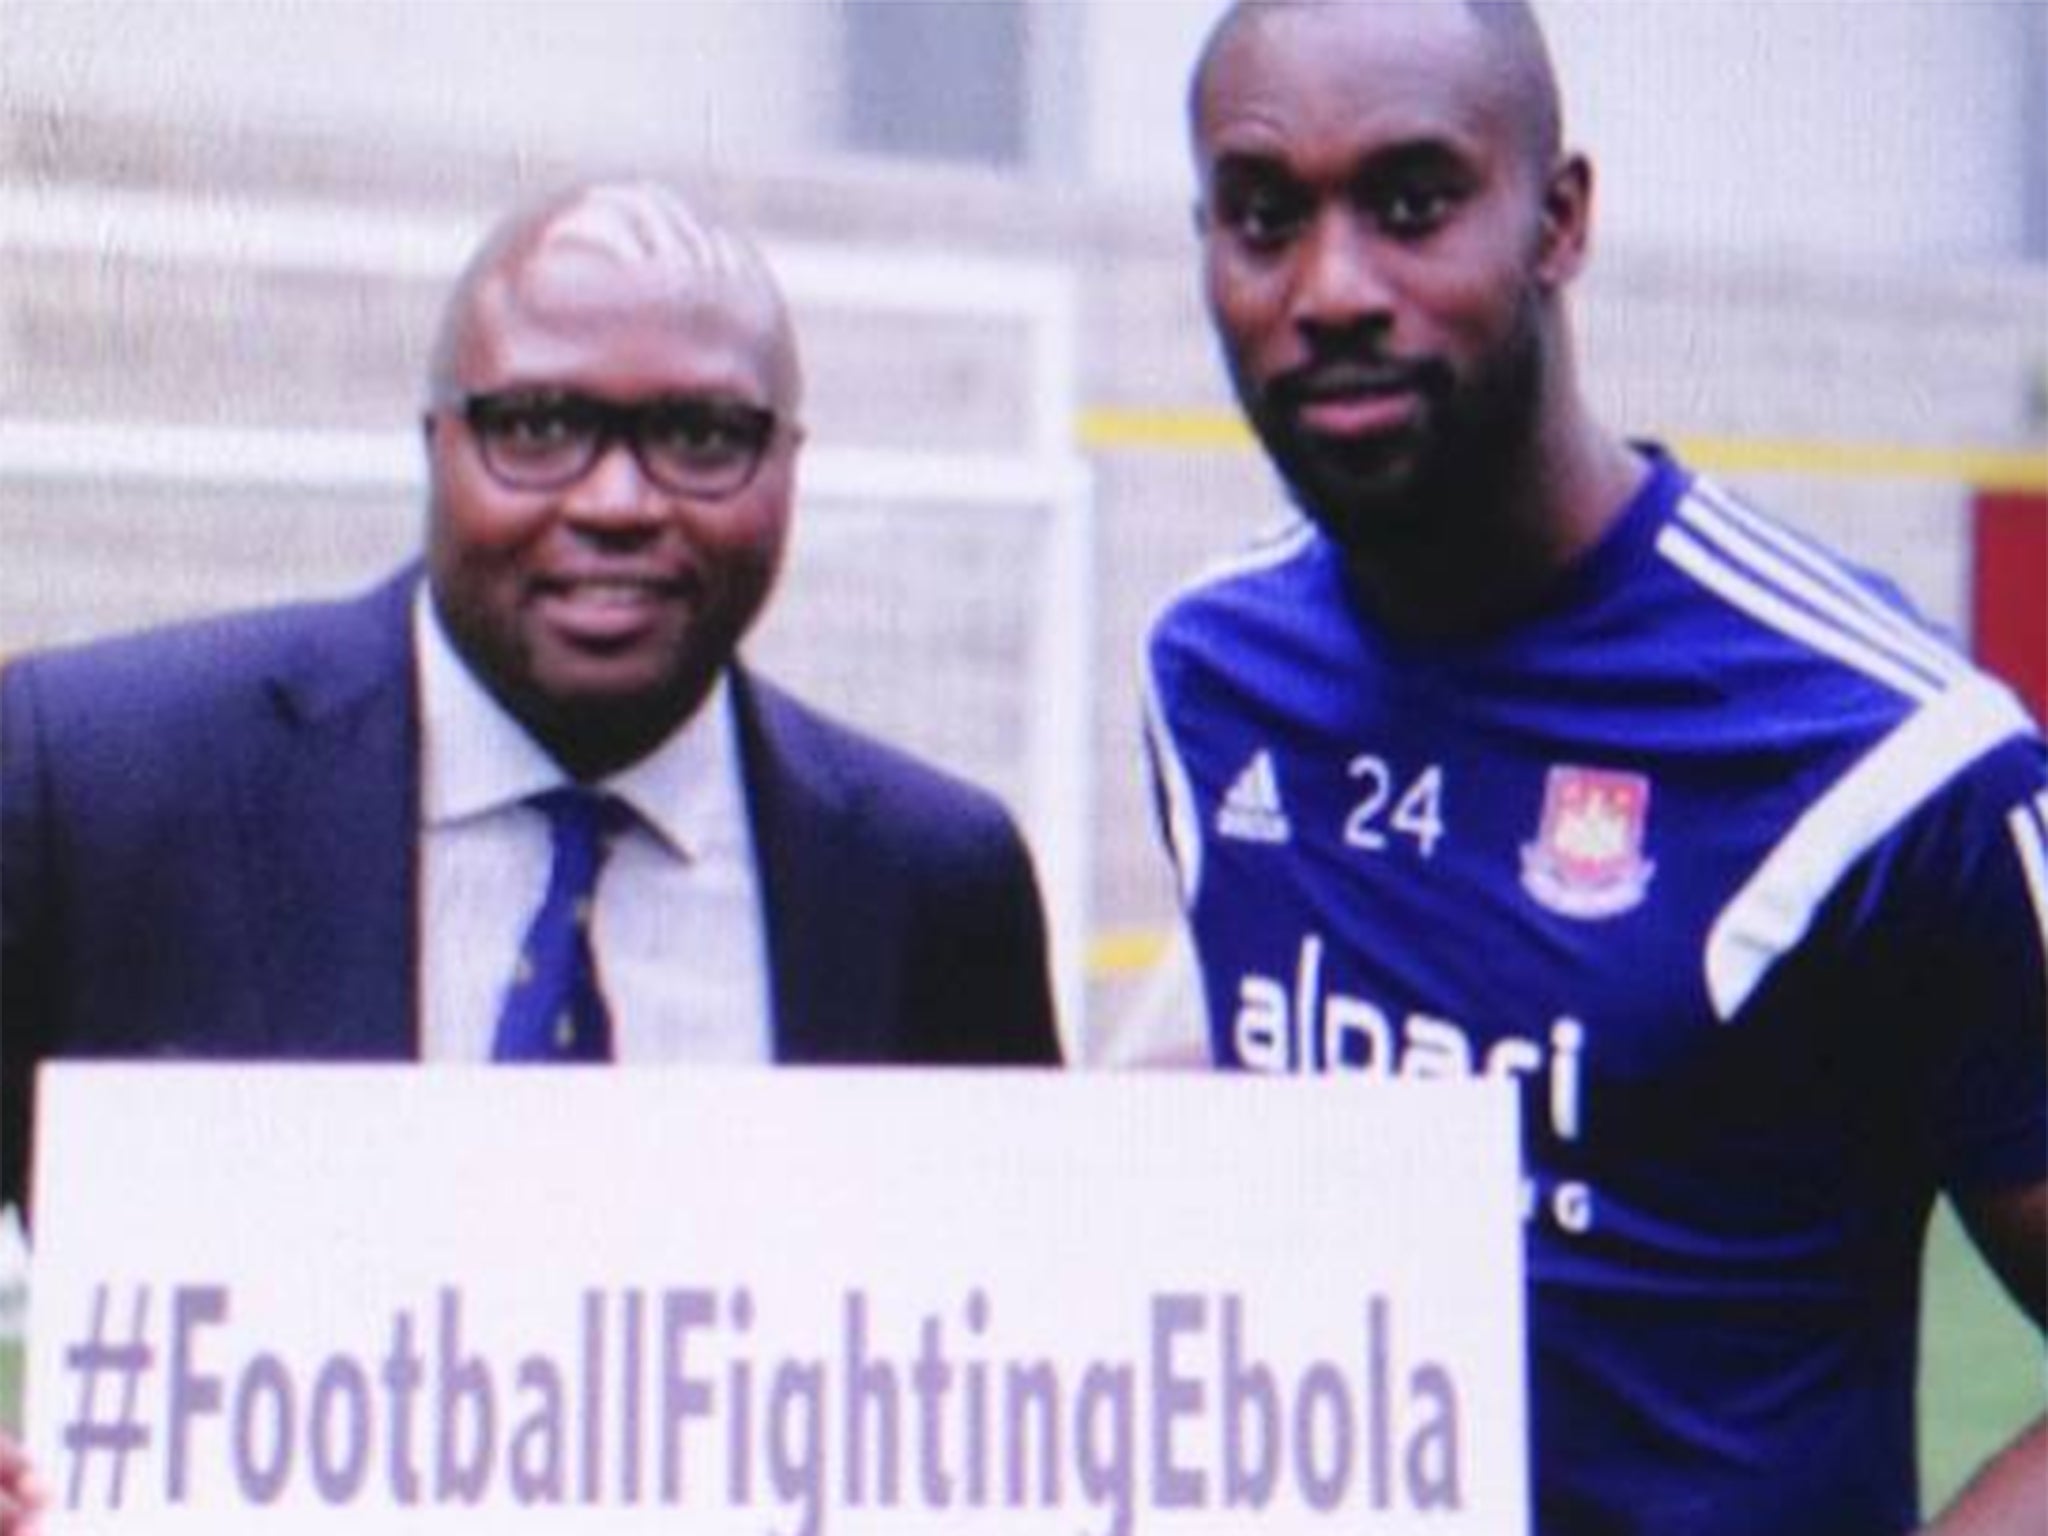 West Ham striker Carlton Cole, whose mother is from Sierra Leone, founded the campaign with Godfrey Torto, left